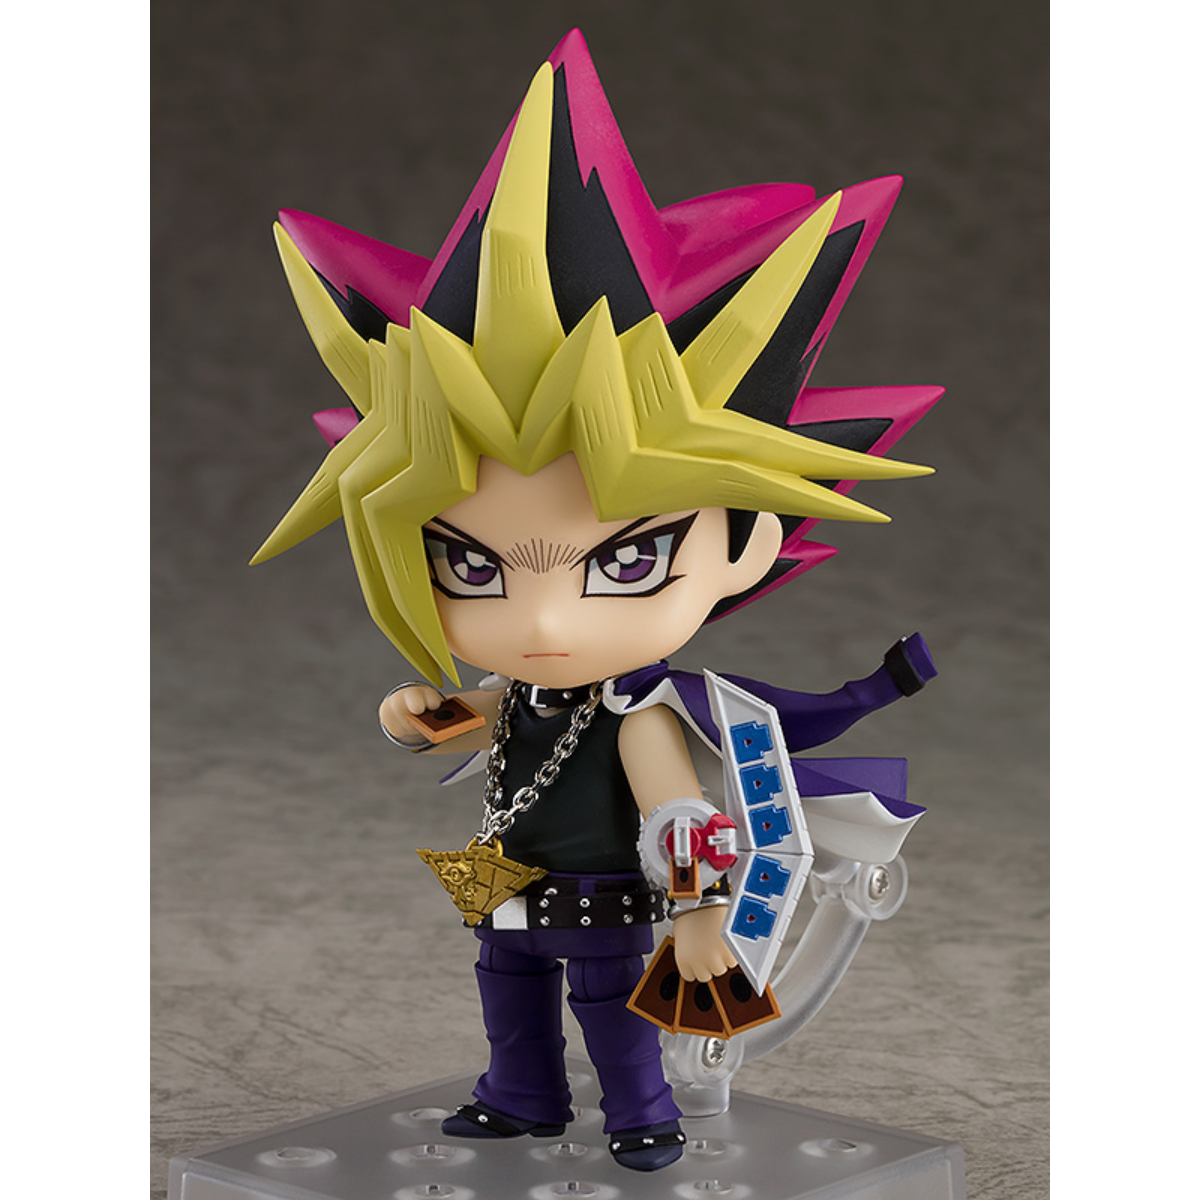 Yu-Gi-Oh! Nendoroid [1069] &quot;Yami Yugi&quot; (Re-run)-Good Smile Company-Ace Cards &amp; Collectibles